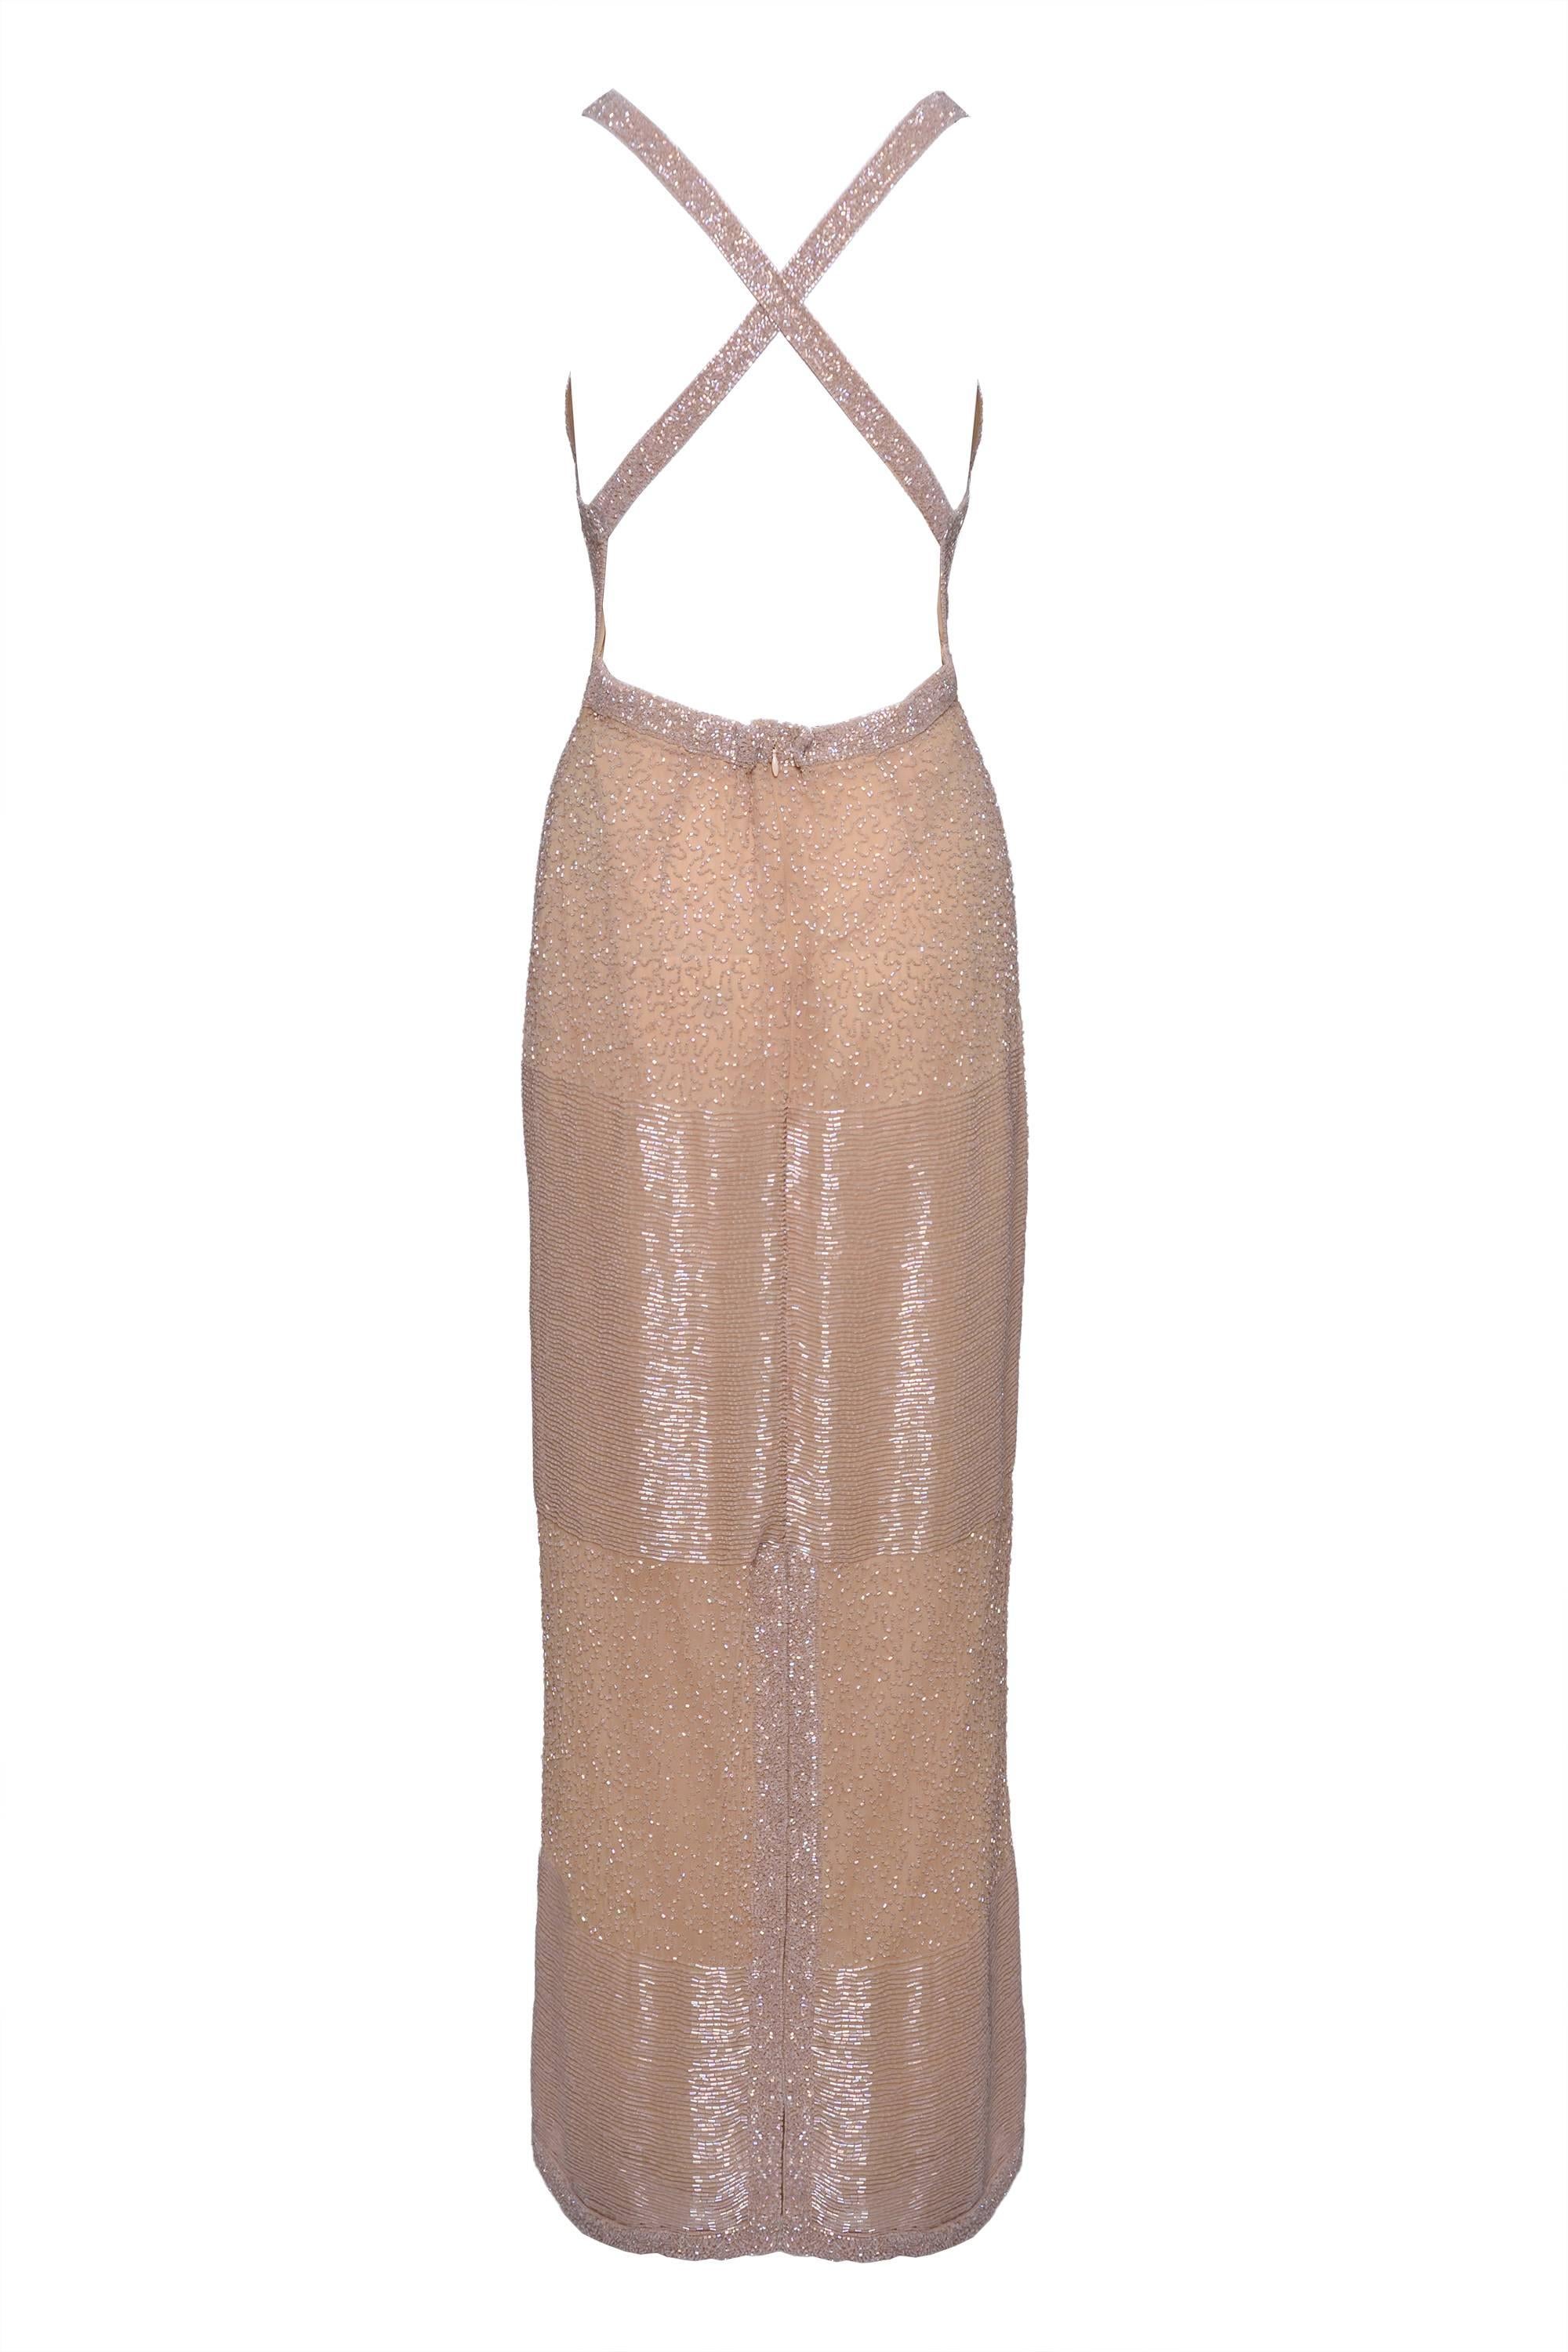 This amazing evening long dress is in a cream silk with a bugle beads fabric. It's fully silk lined, back zip closure , hook and eye closure and with a back tear. Back nude and cross strap on the back.

Excellent Vintage Condition

Fabric: Silk